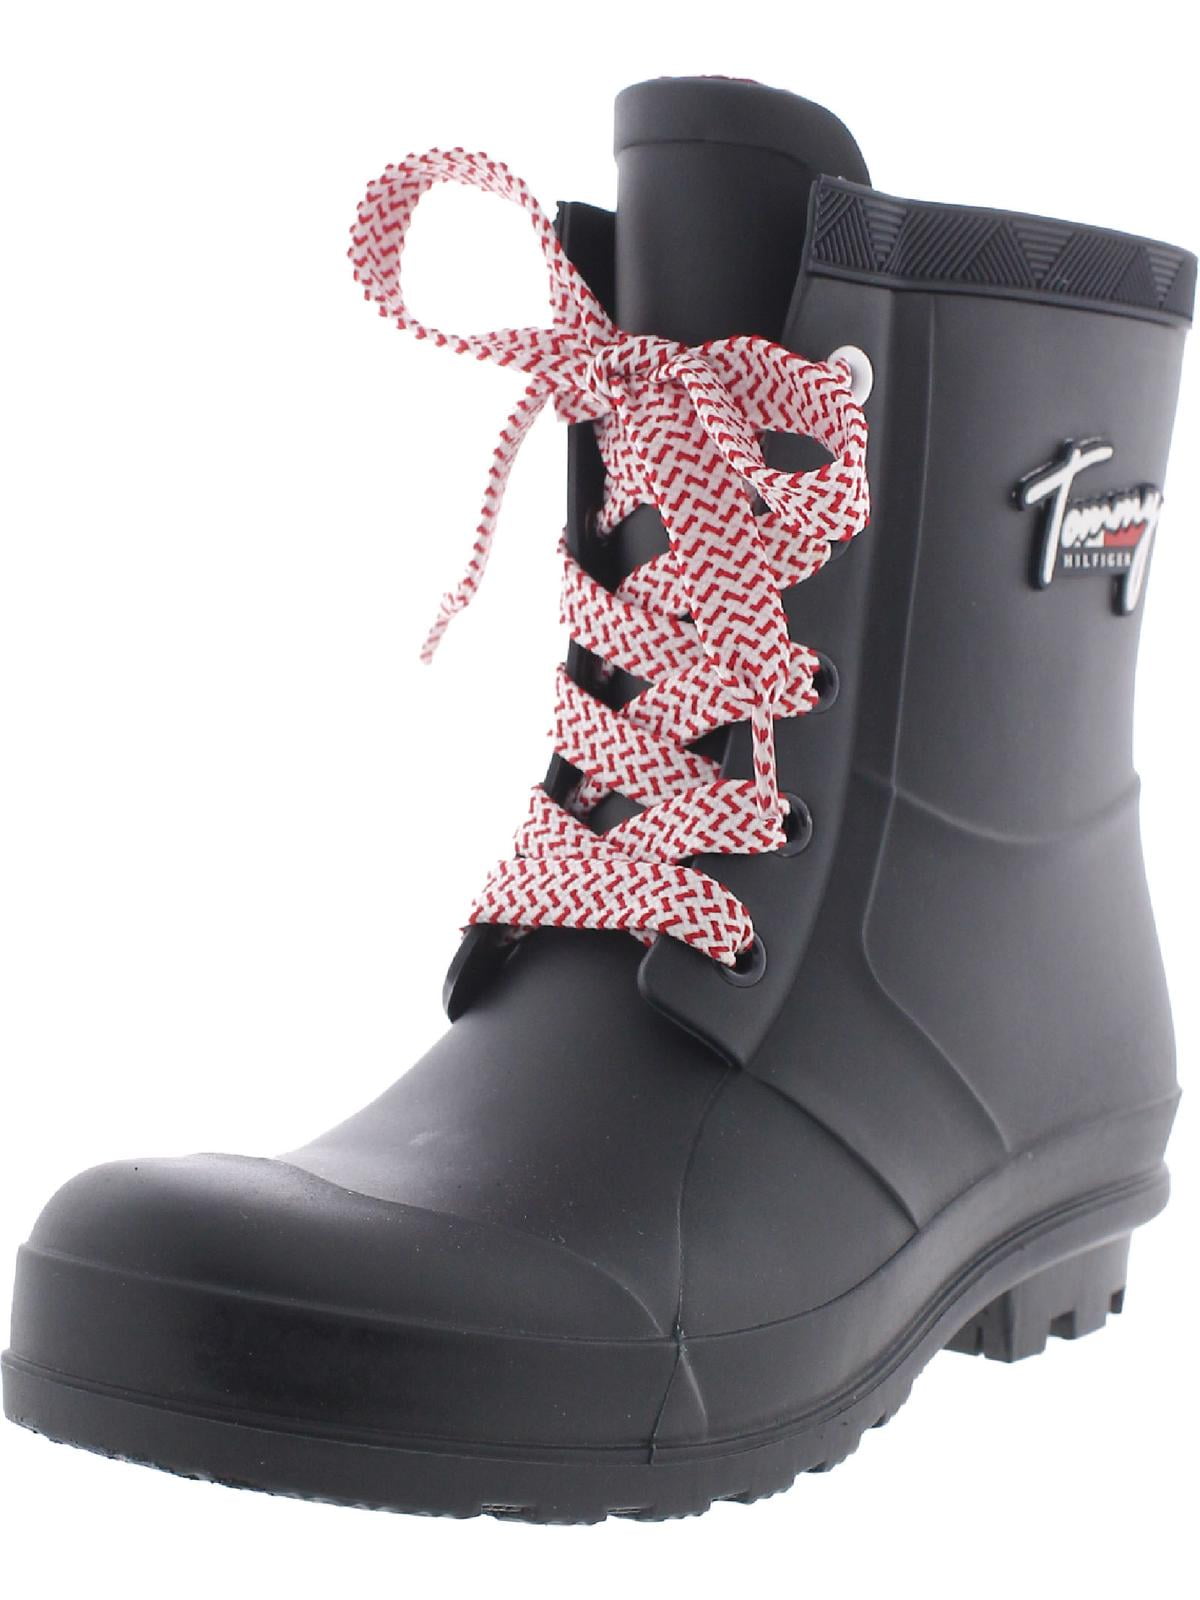 Tommy Hilfiger Womens Lace Up Wellies Rain Boots -